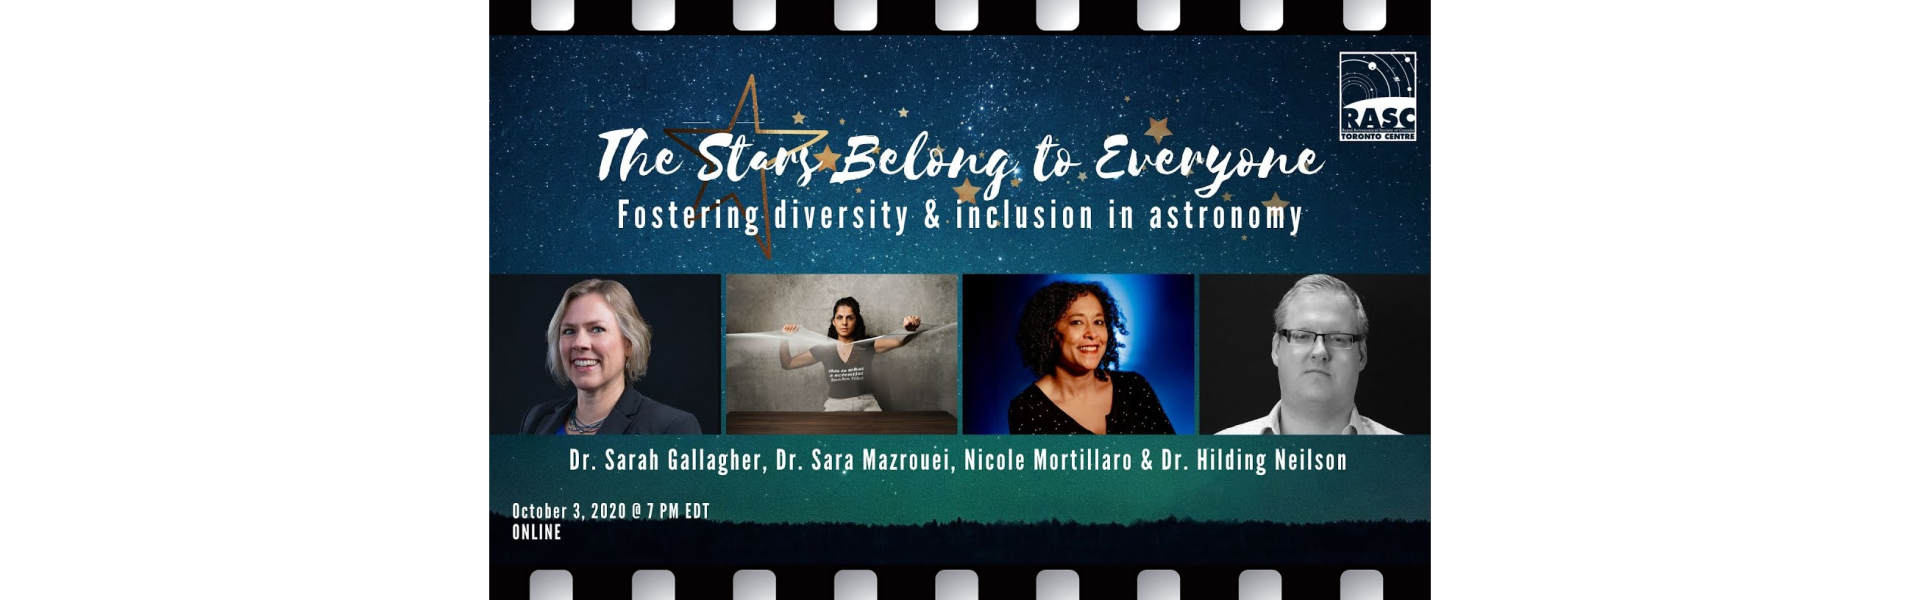 Video: The Stars Belong to Everyone: Fostering Diversity and Inclusion in Astronomy